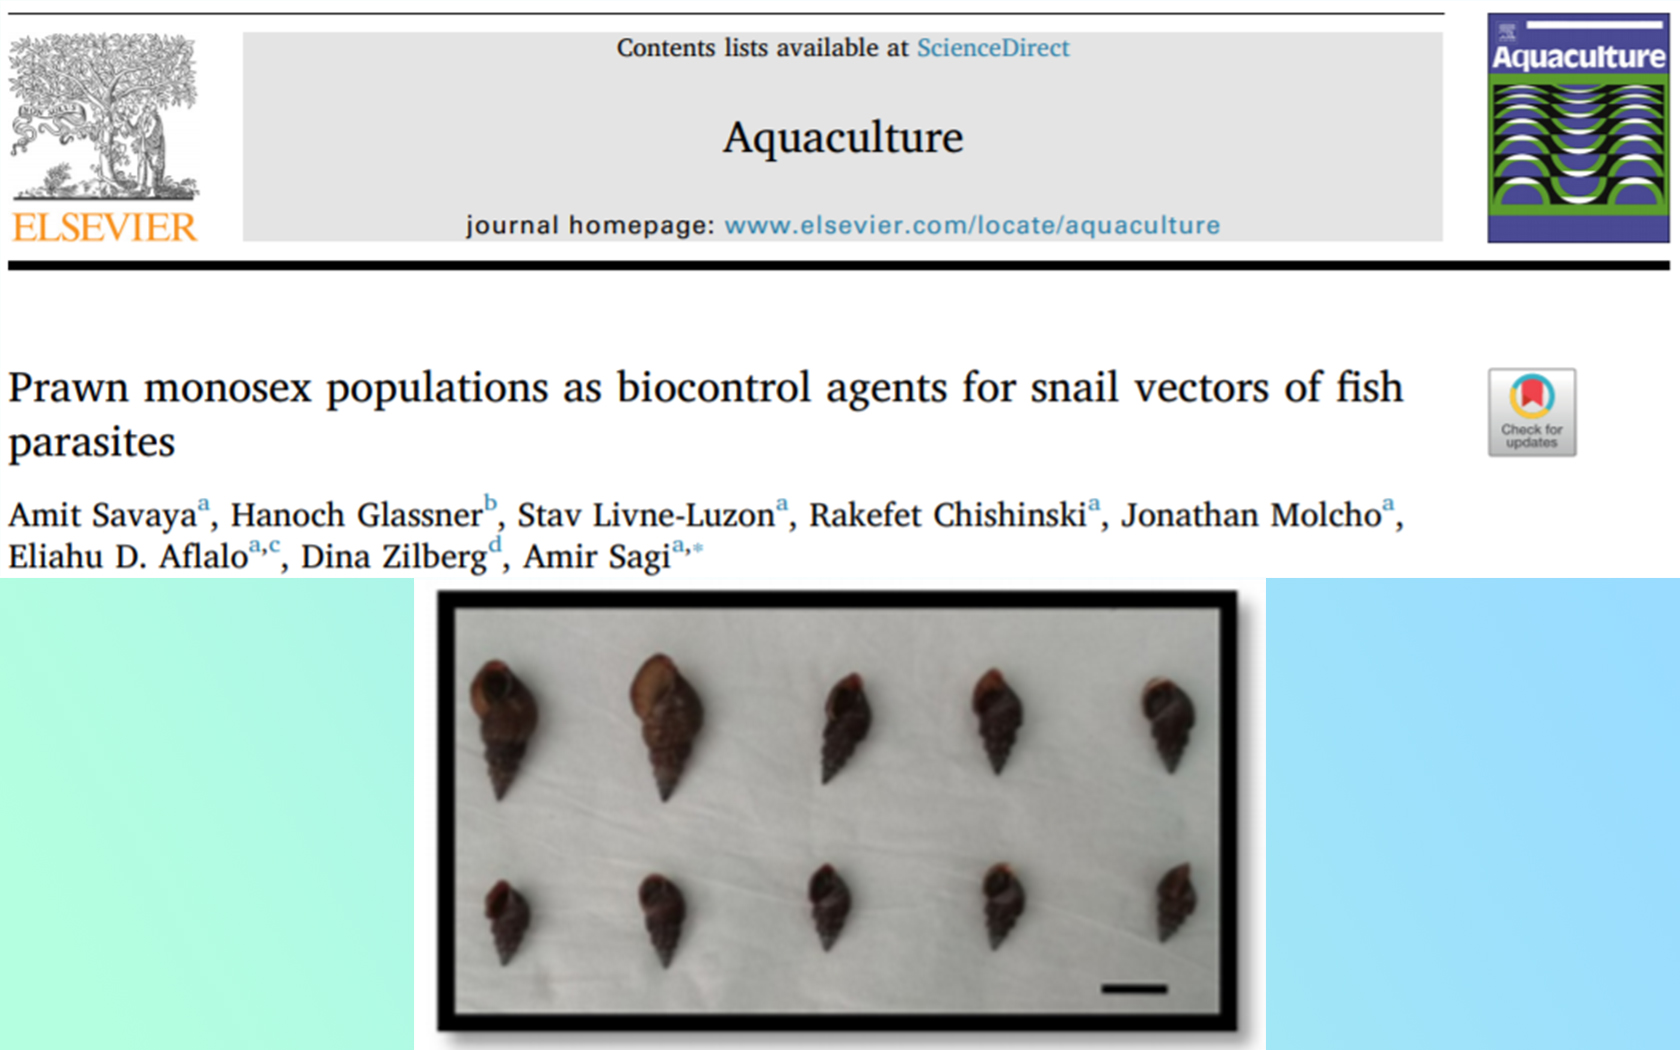 Congratulations to Amit on his publication of using prawn monosex populations as bio-control agents over snail vectors of fish parasites